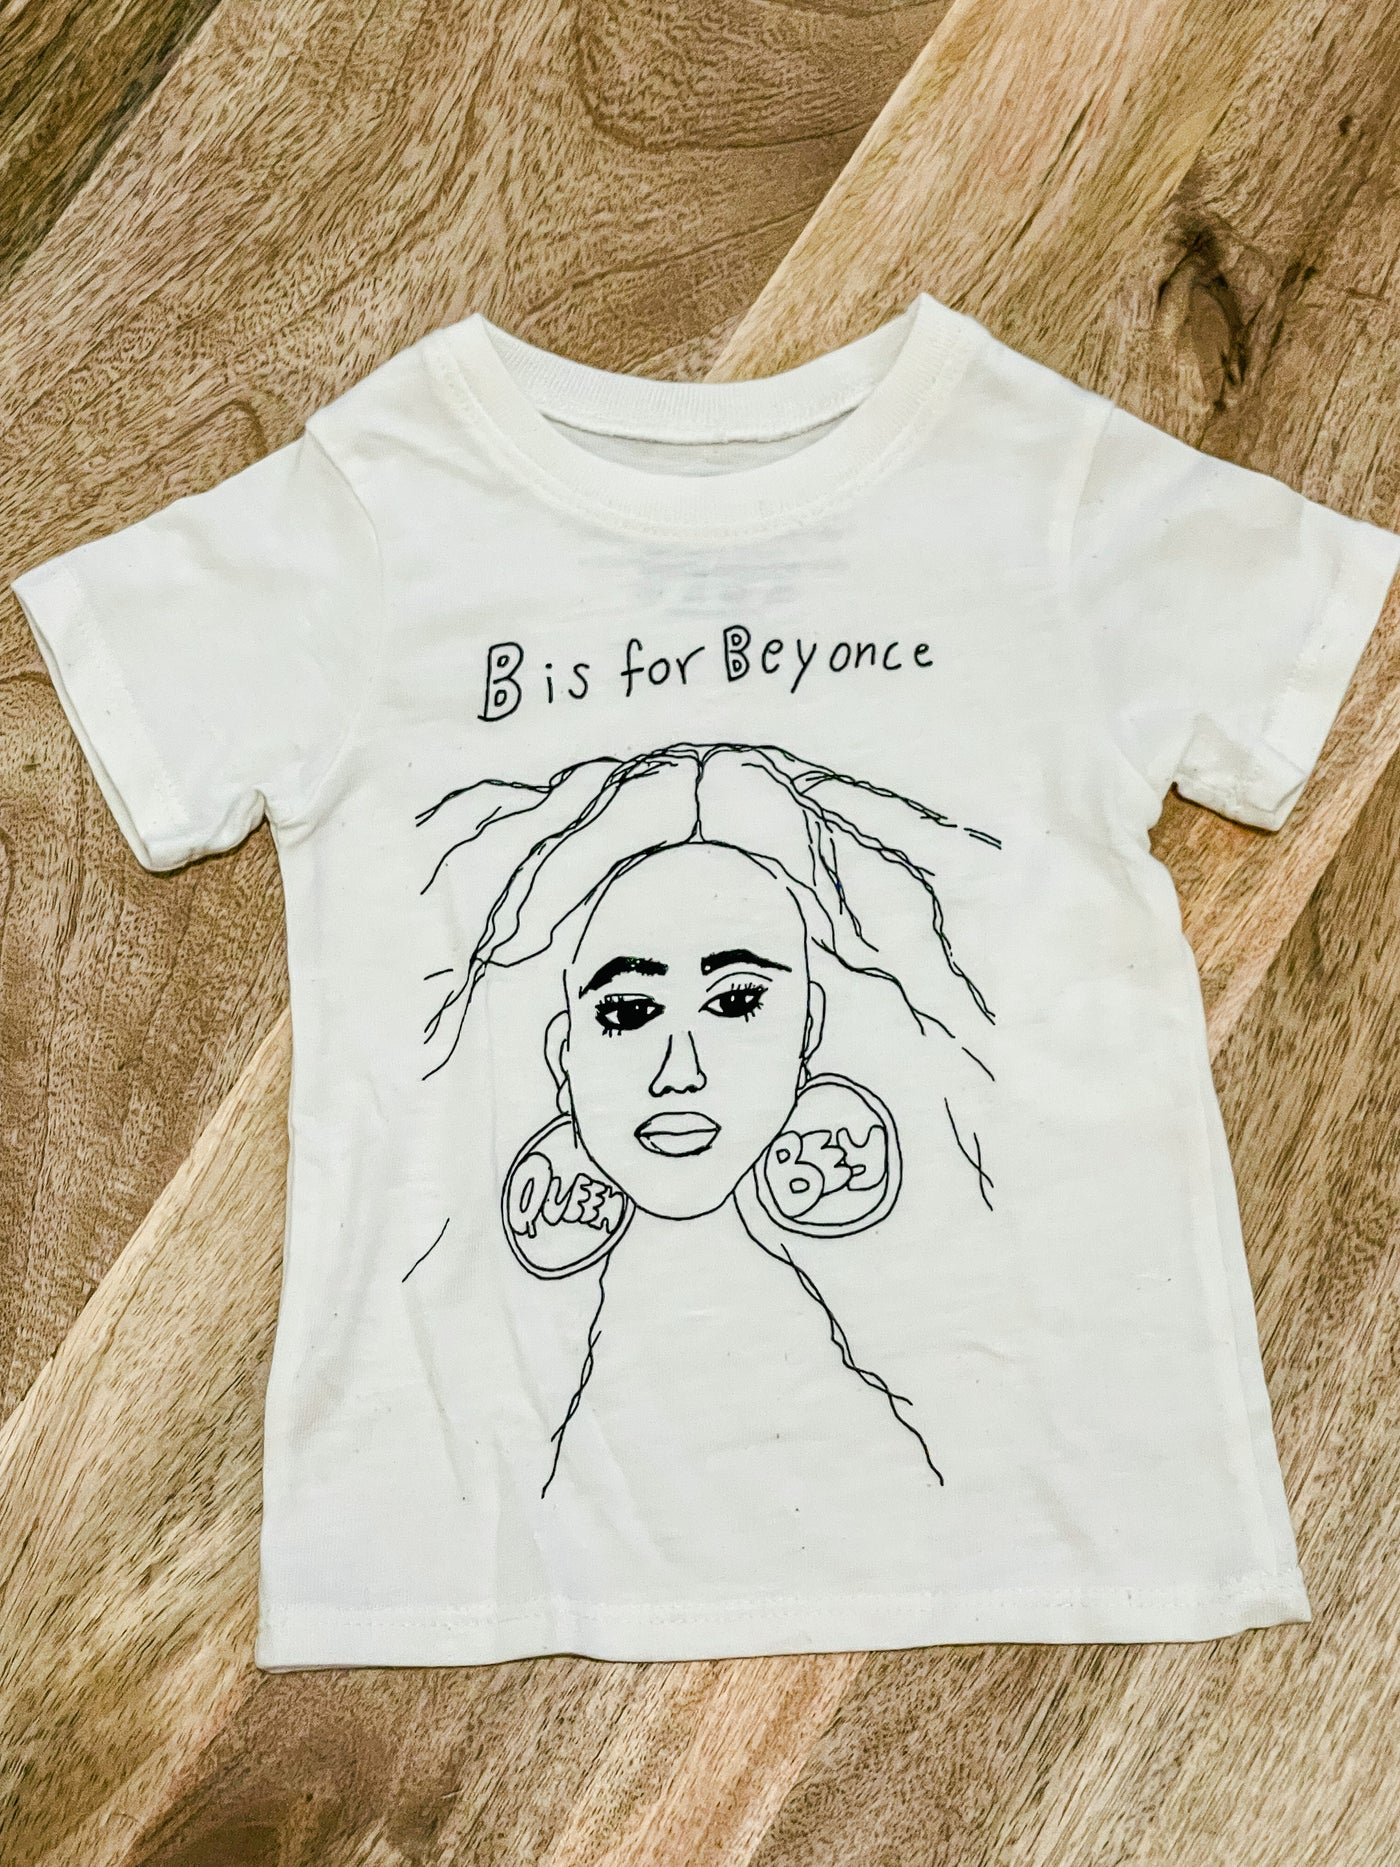 B is for Beyonce